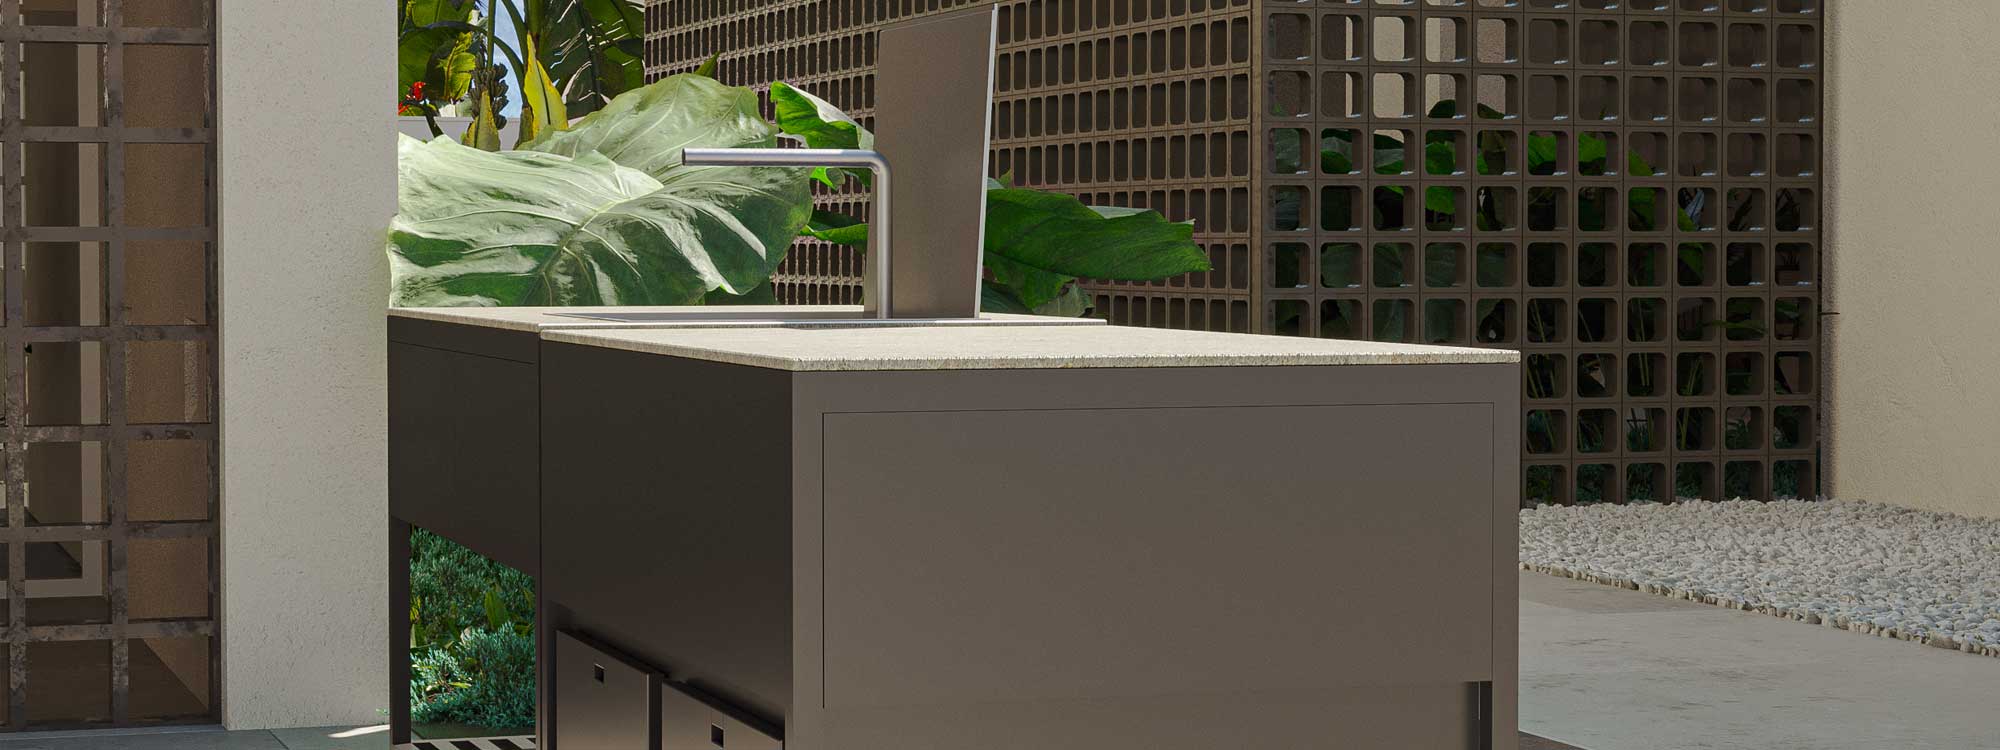 Image of Eterna modern garden kitchen by Oiside, with architectural trellis in the background